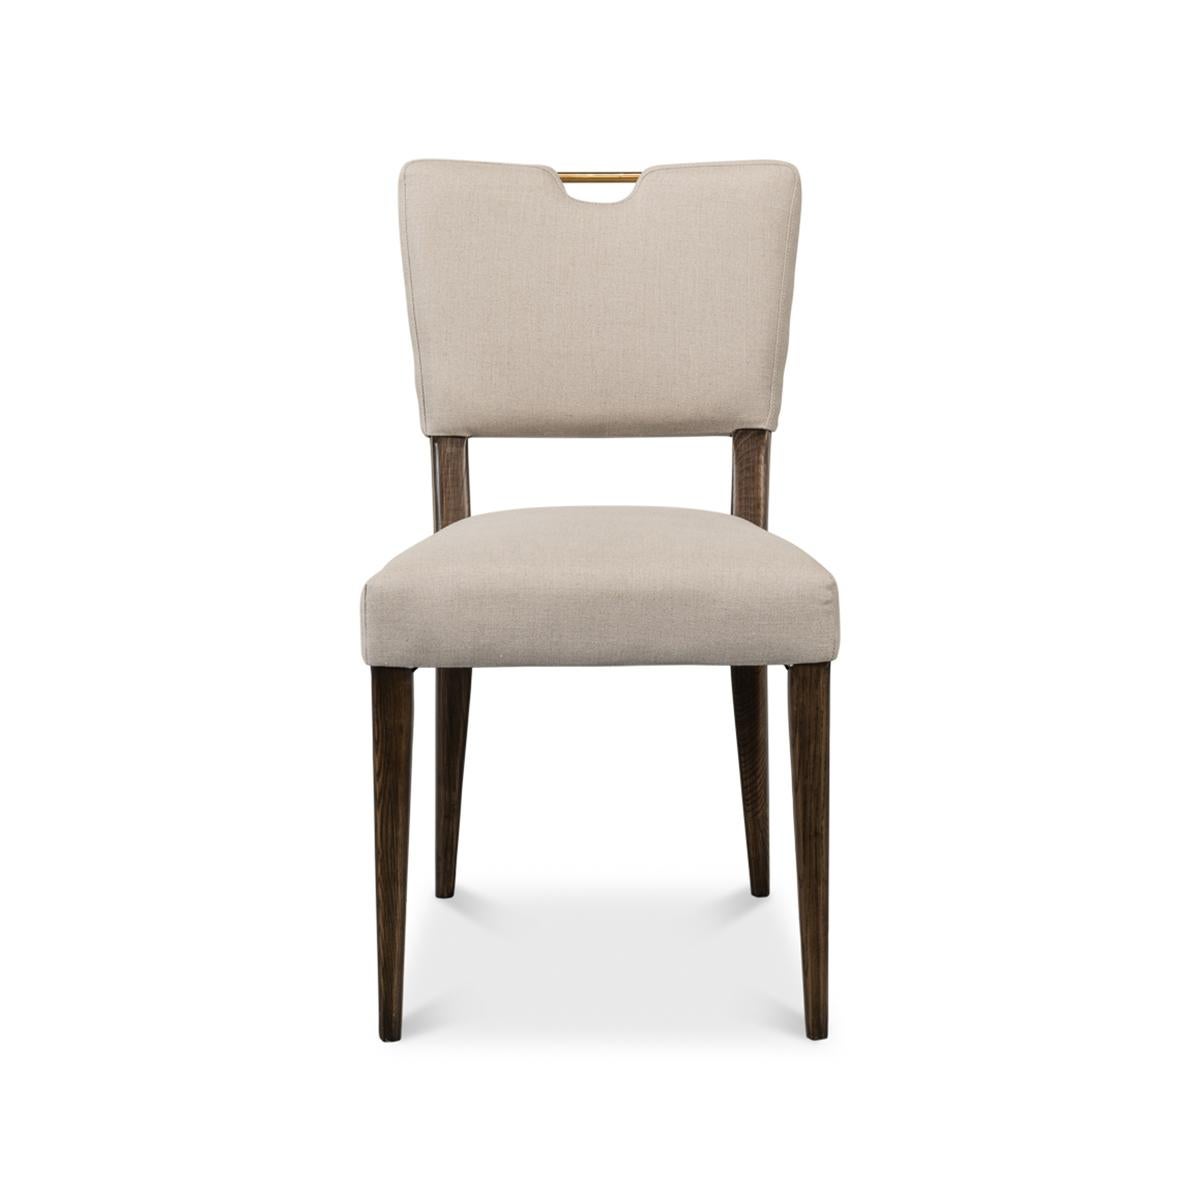 Modern English dining chair, with graceful lines and a full curved back to accentuate comfort, a linen cover speaks to soft tactile luxury. From a board meeting to dinner for twelve, these are the statement piece every great host